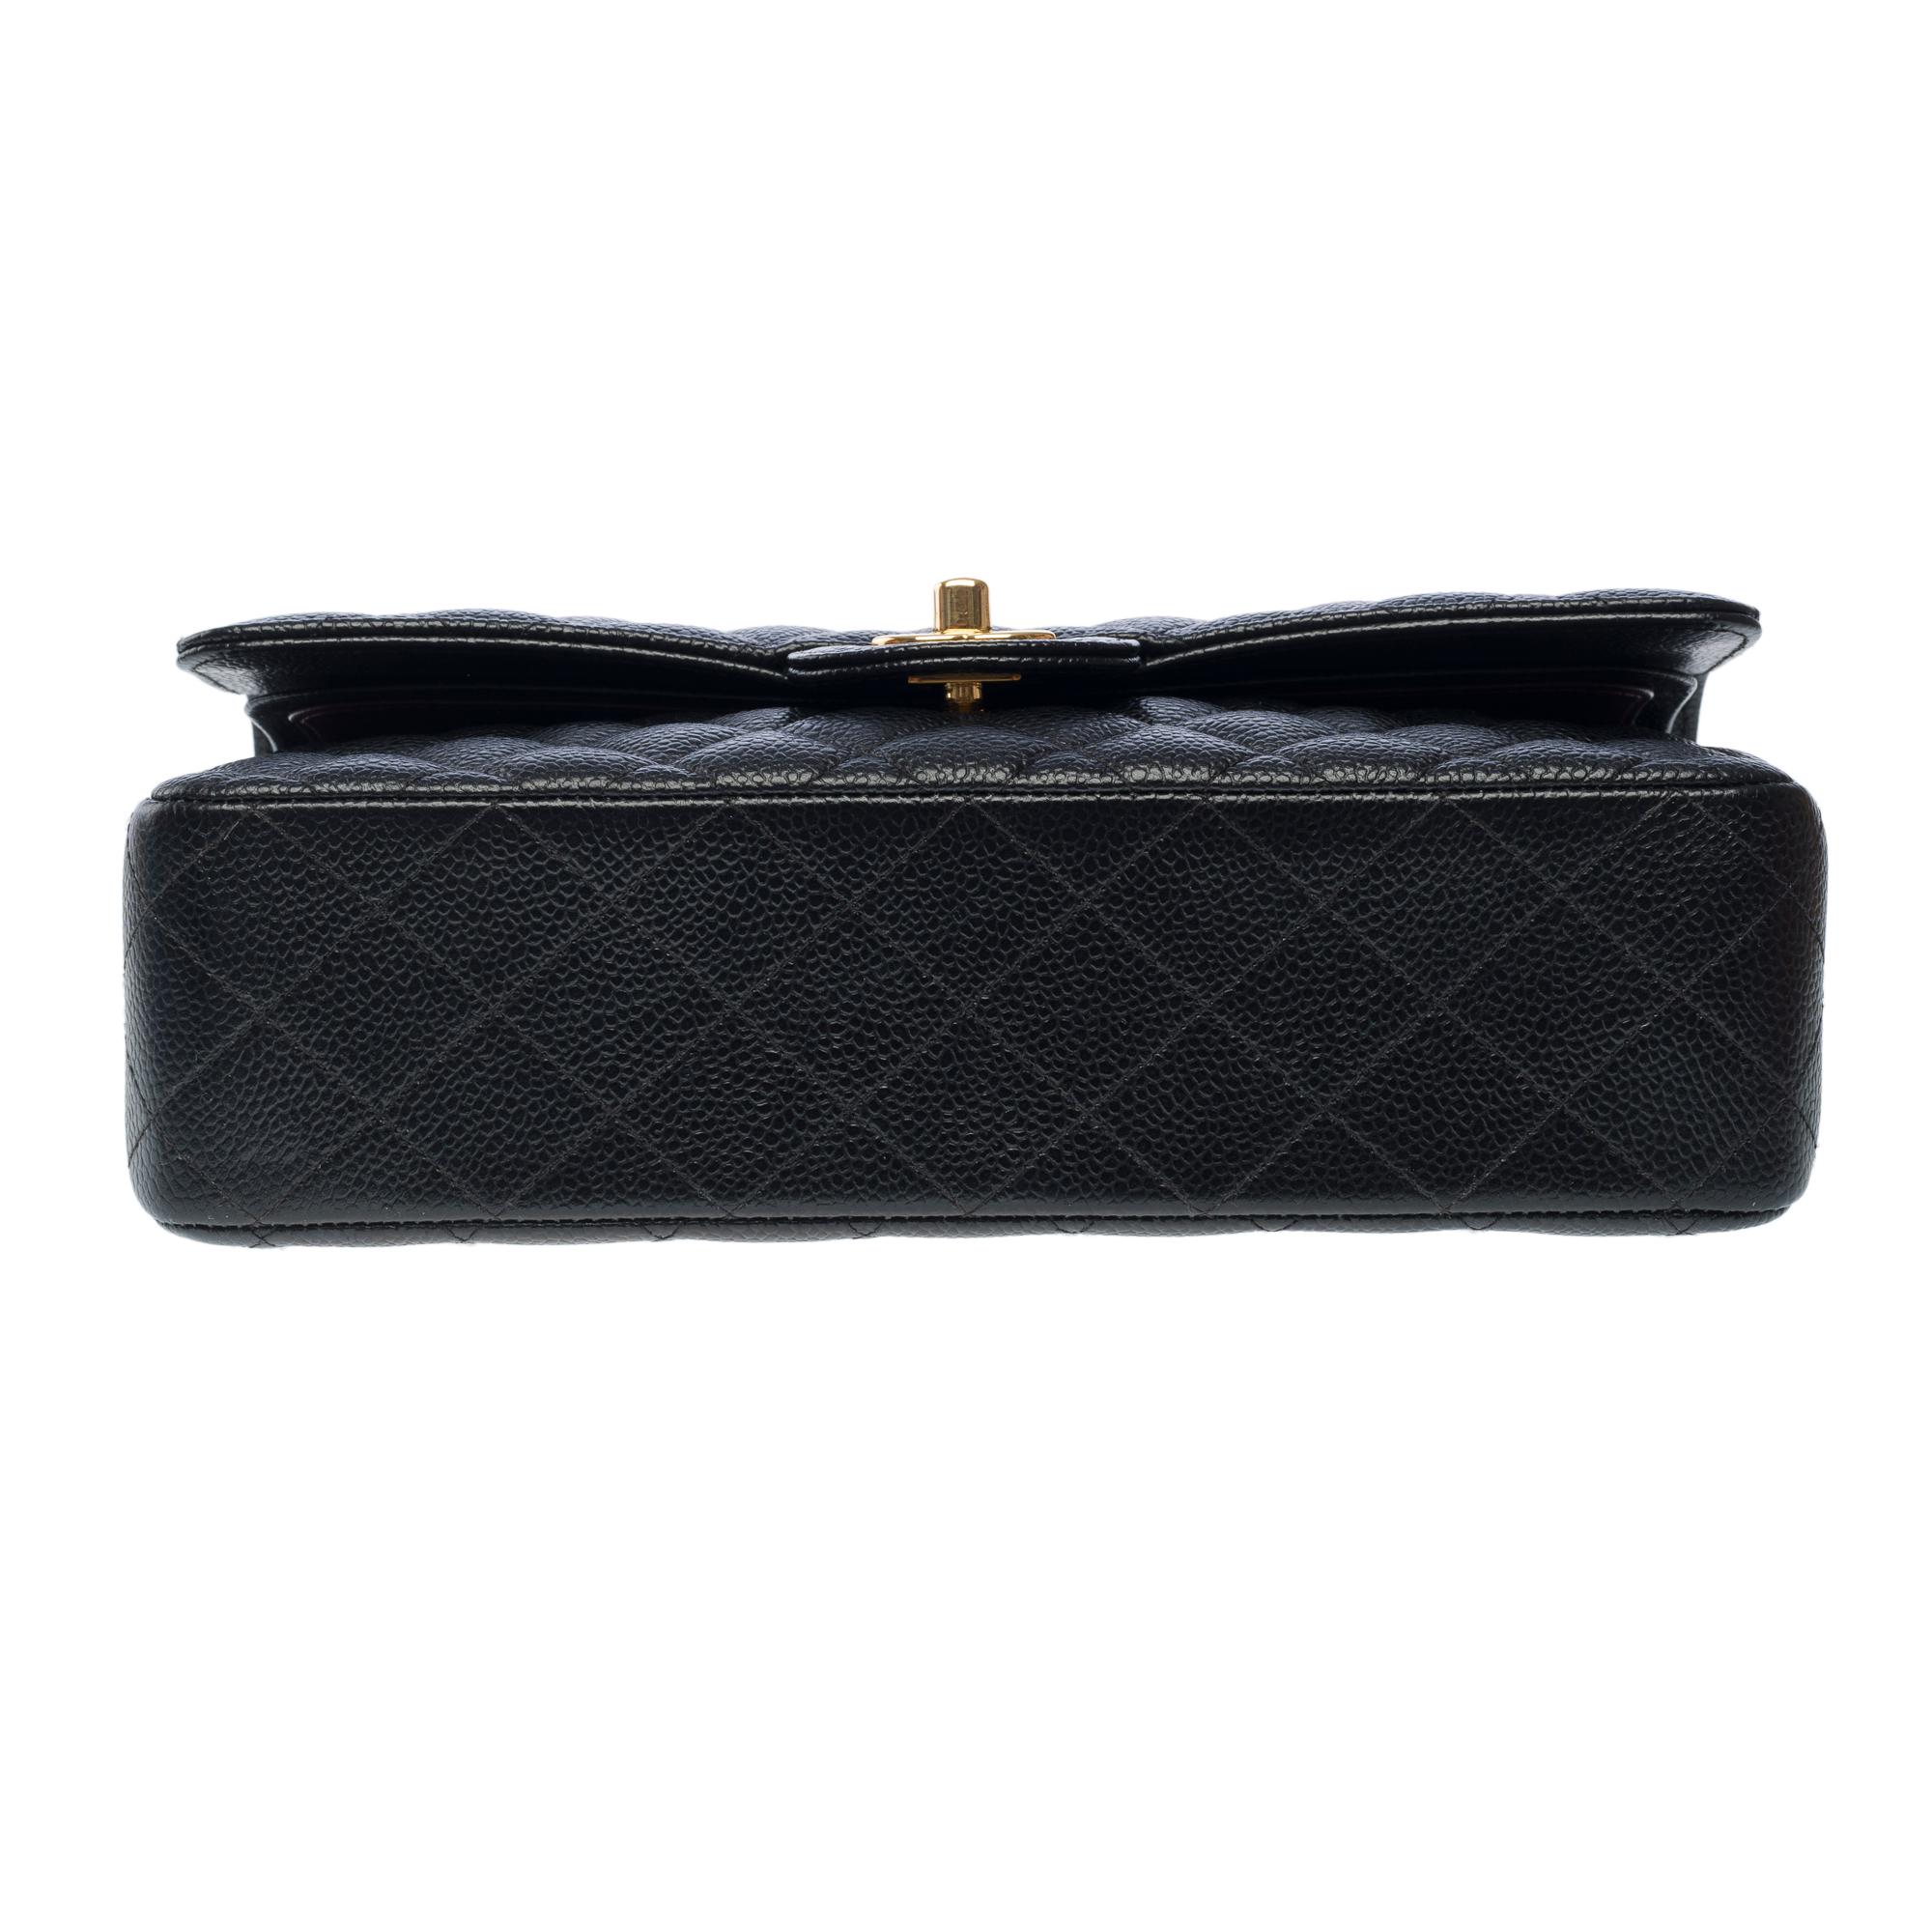 Chanel Timeless double flap shoulder bag in Black Quilted Caviar leather, GHW 7